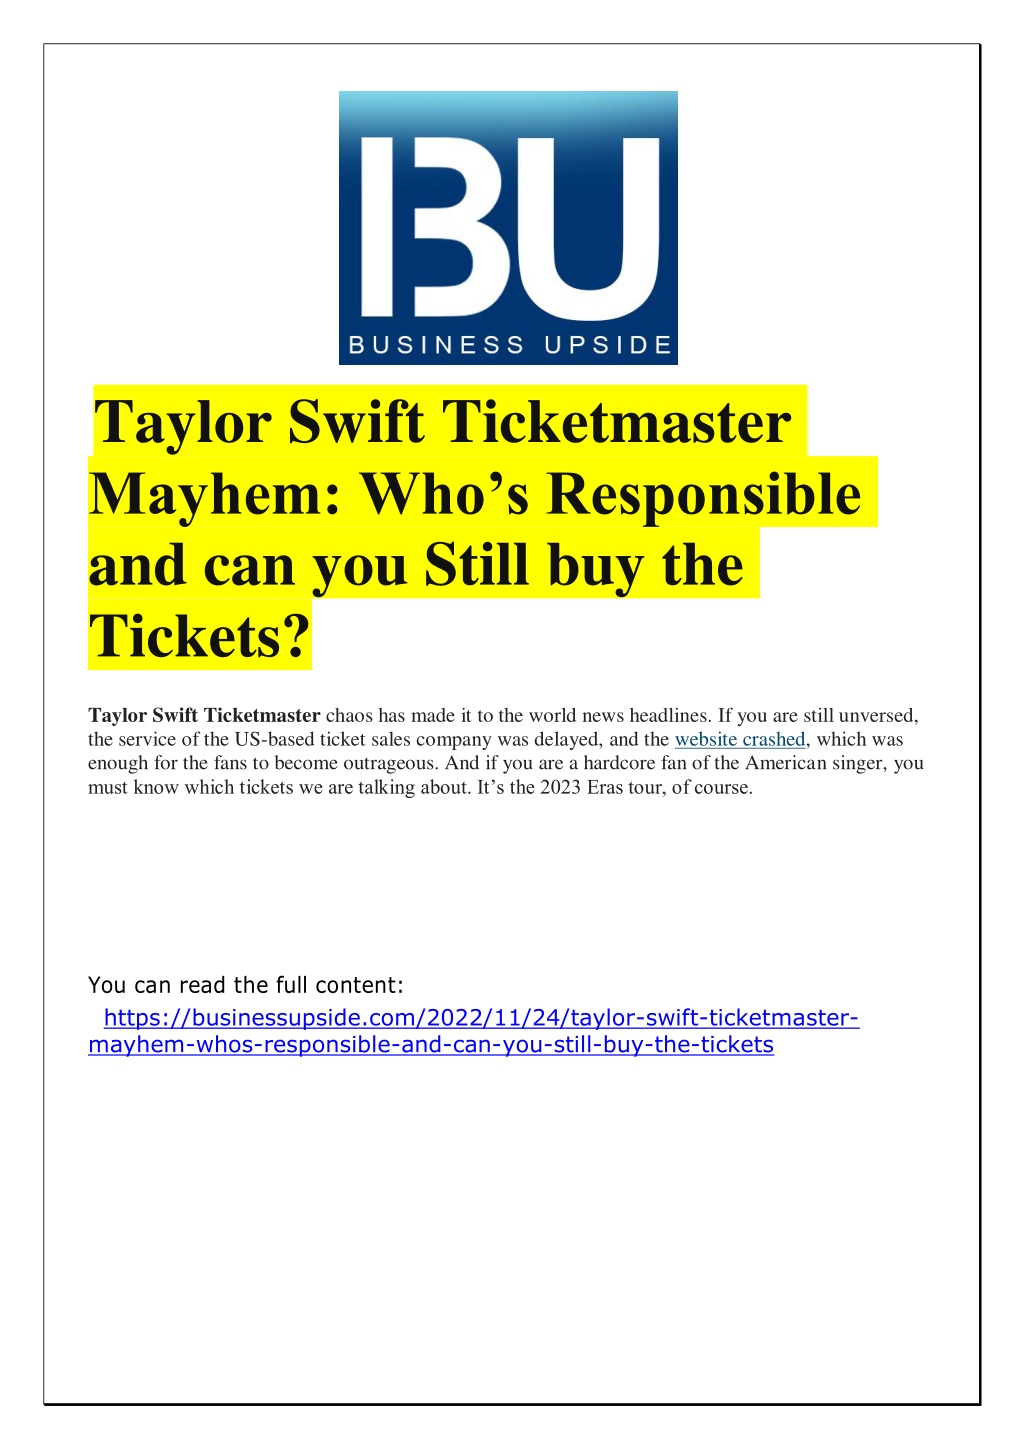 PPT Taylor Swift Ticketmaster Mayhem Who’s Responsible and can you